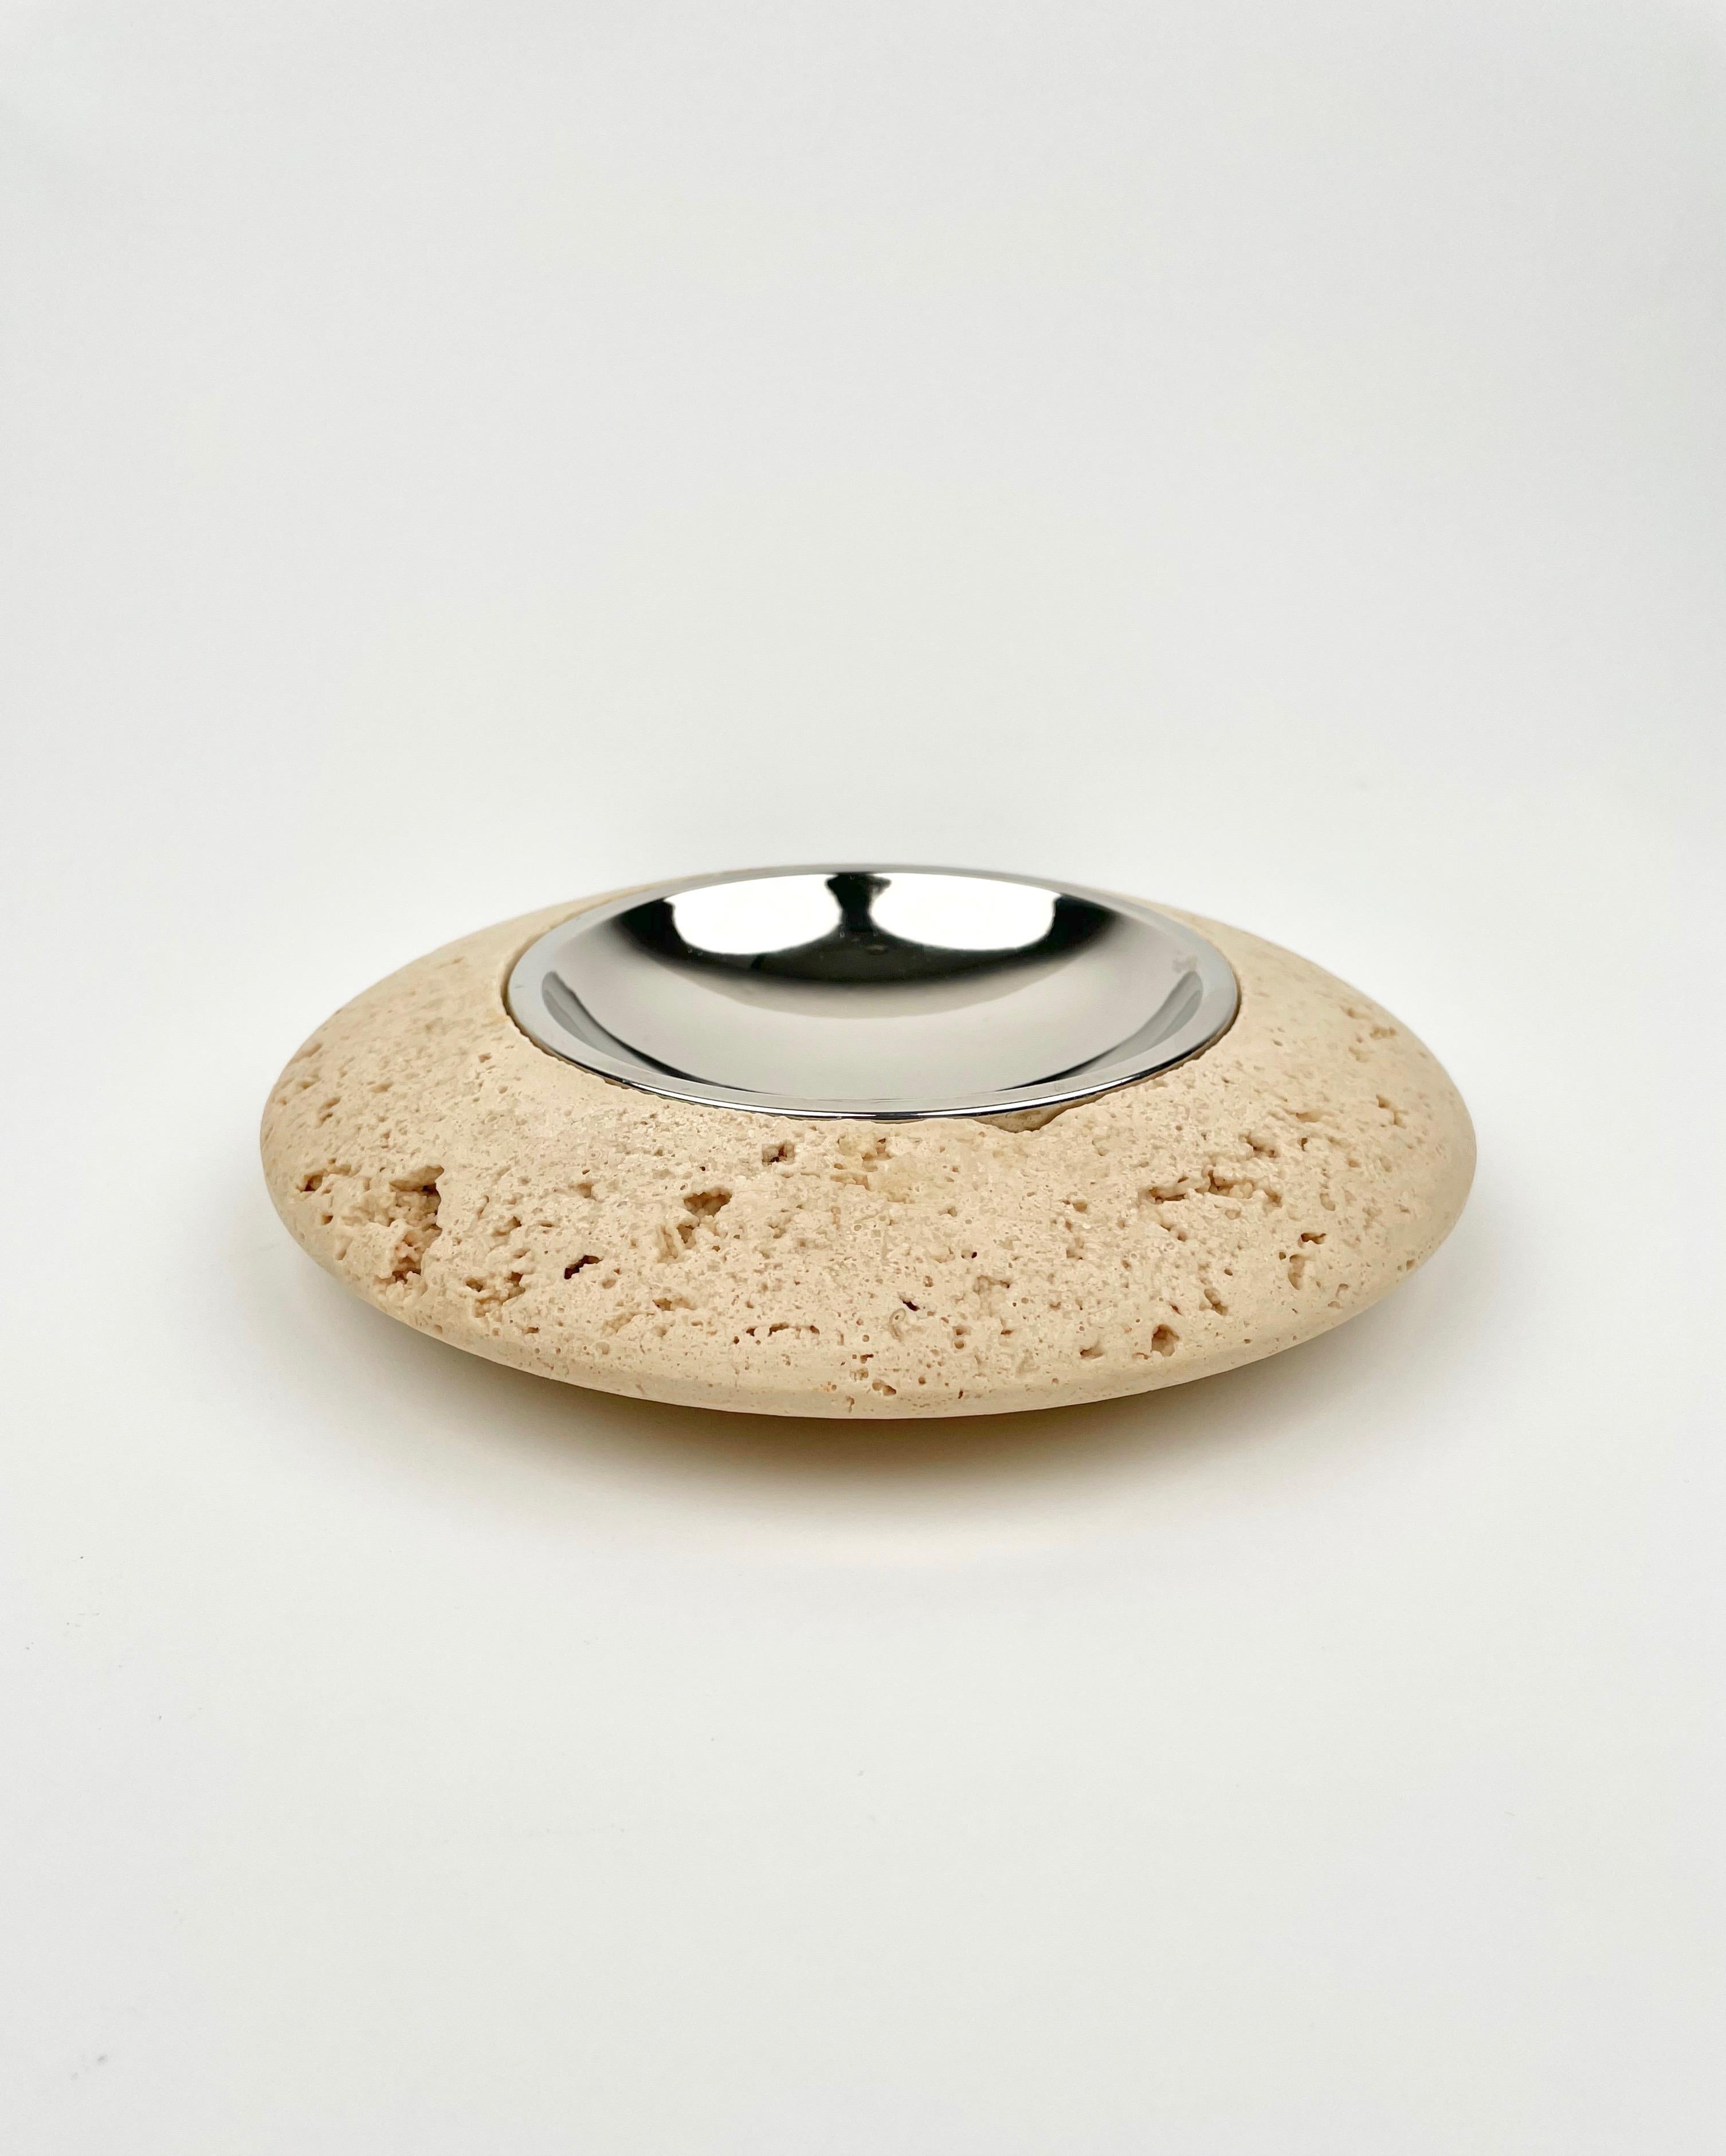 Round ashtray in travertine marble and steel made in Italy in the 1970s.